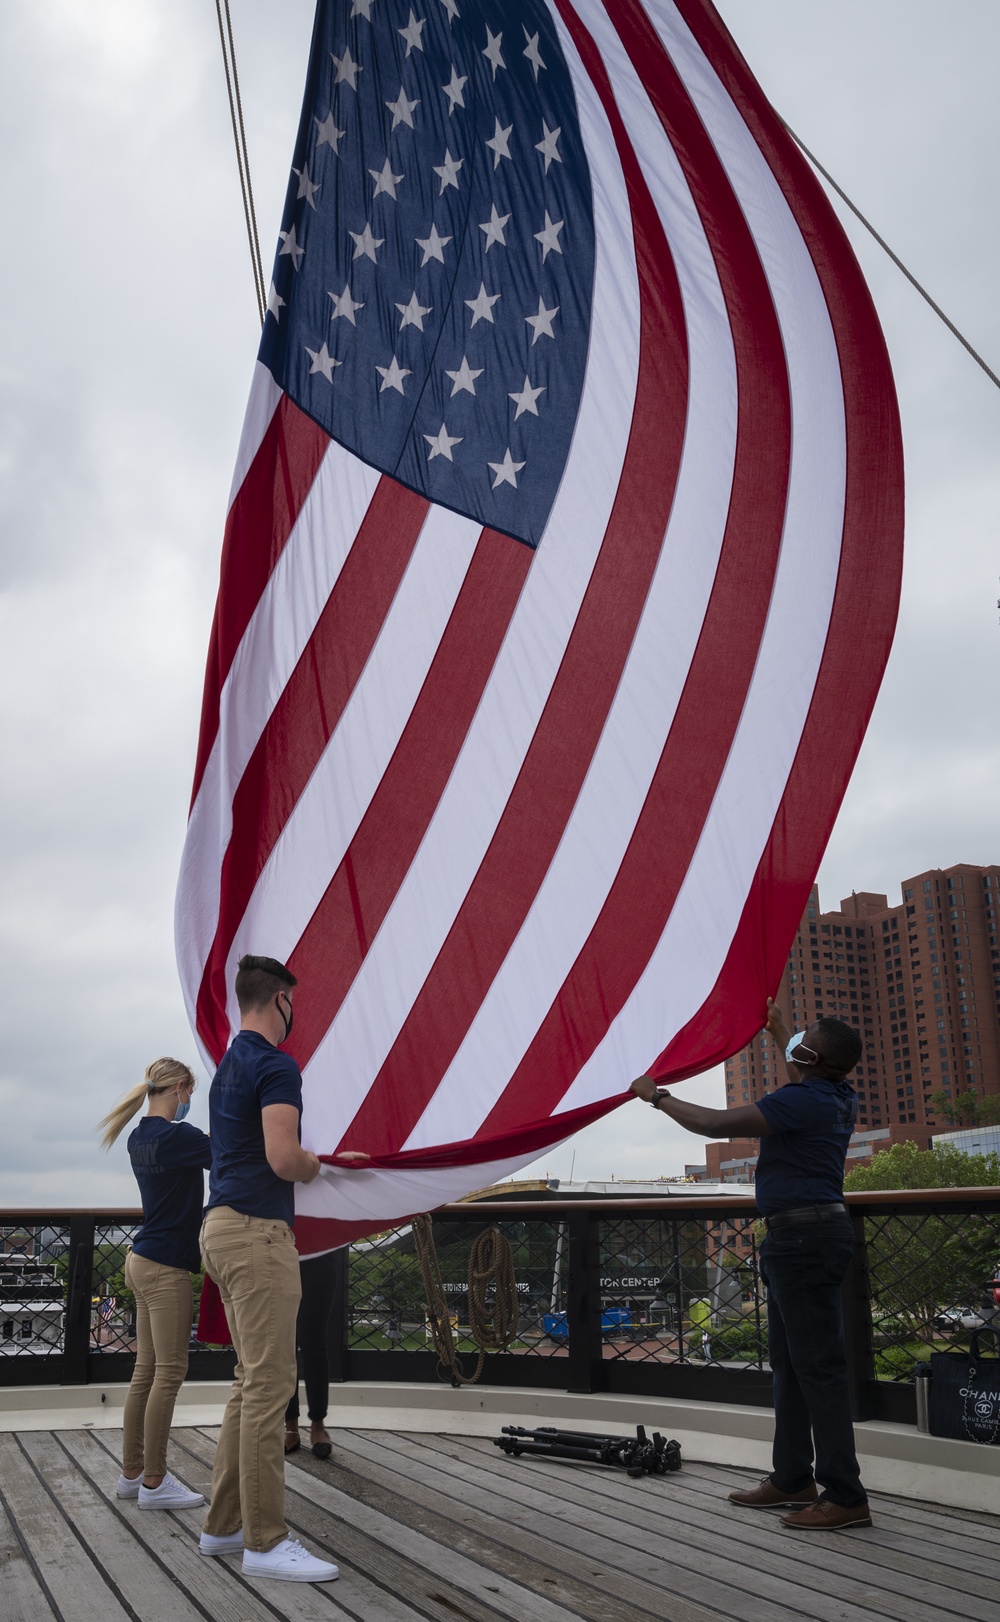 Oath of Enlistment ceremony aboard USS Constellation